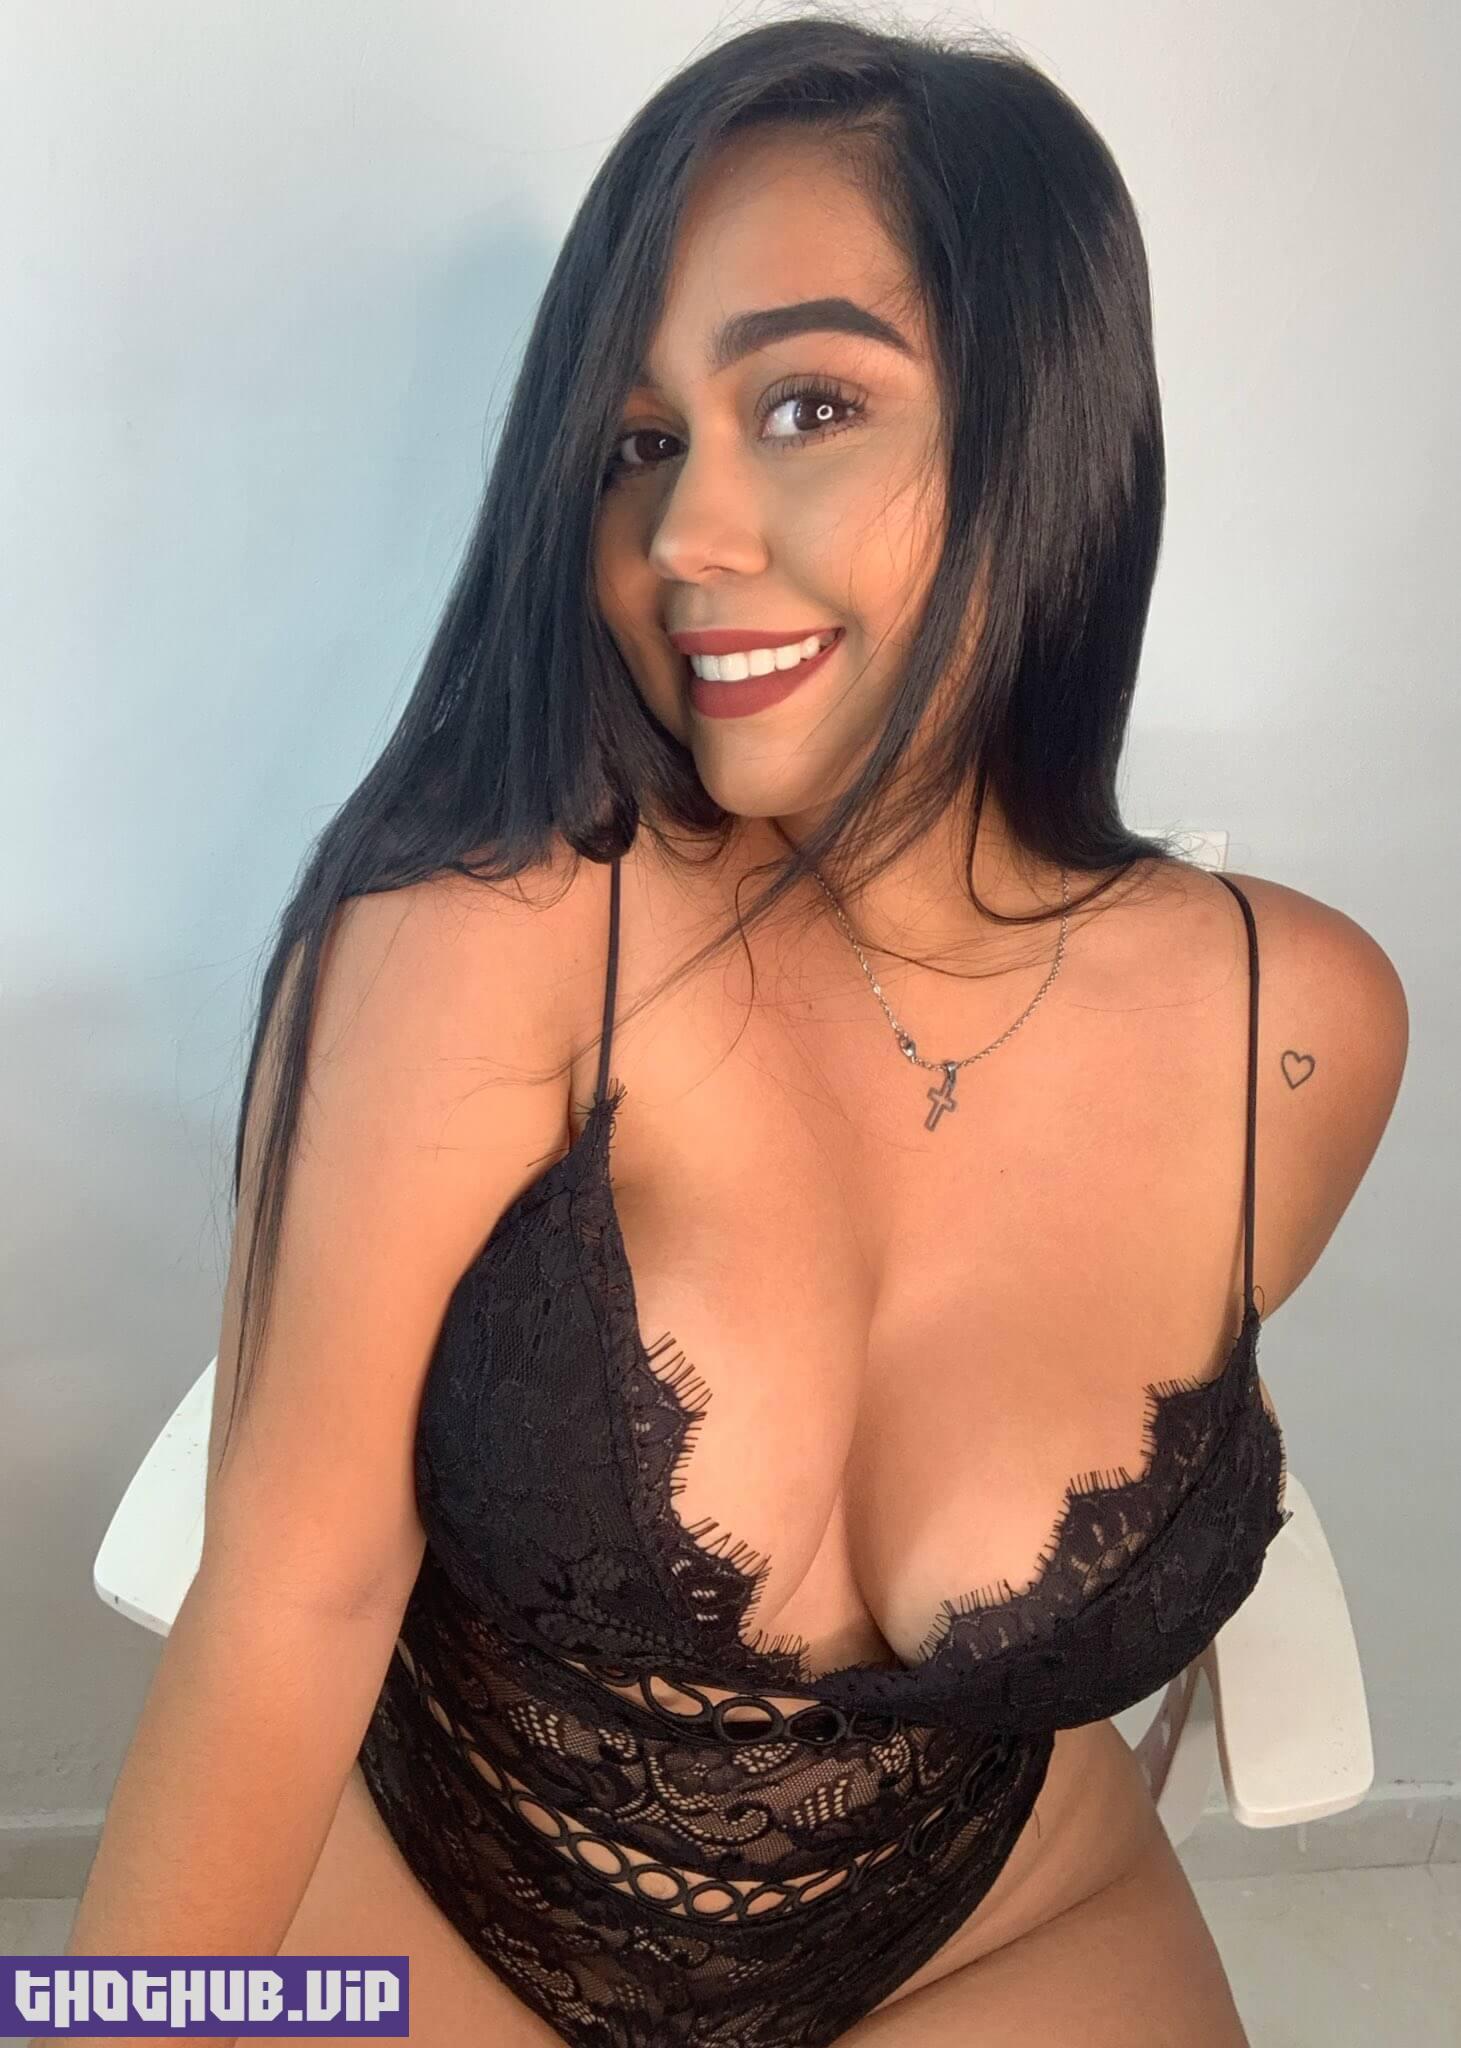 STEFANIE PAOLA LEAKED ONLY FANS 16 STEFANIE PAOLA LEAKED ONLY FANS